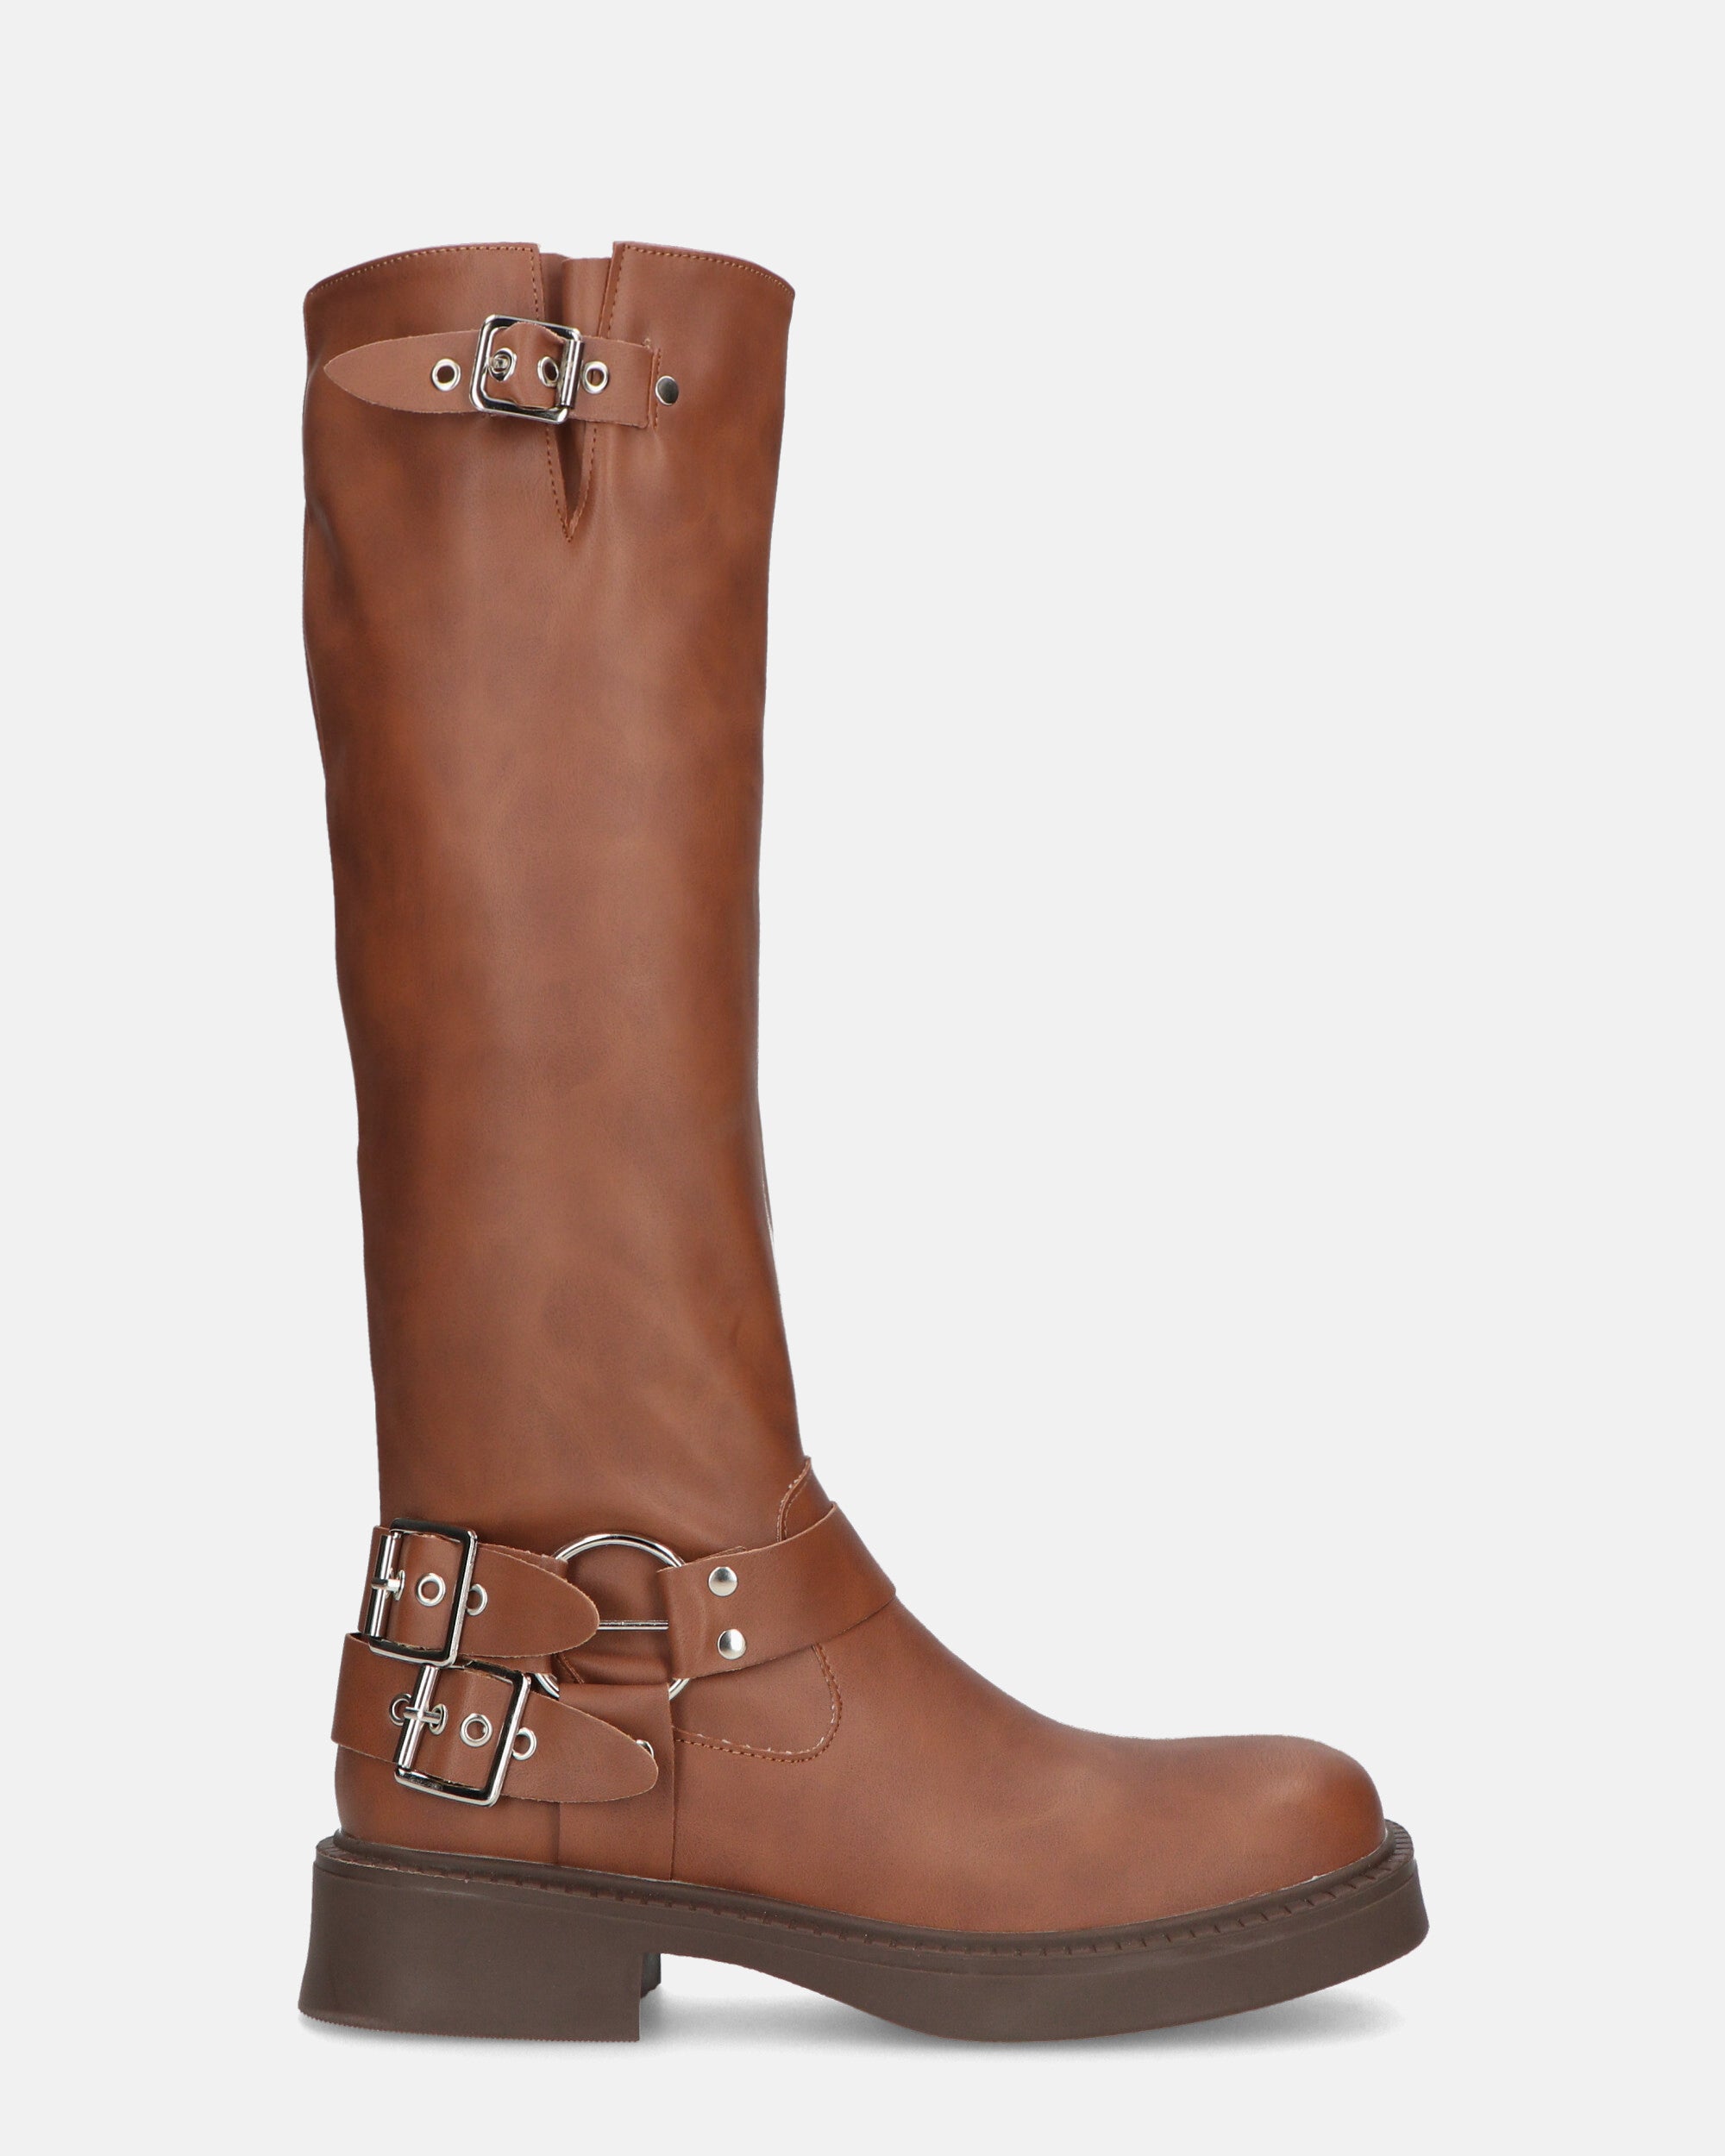 HISA - brown high boots with various straps and buckles